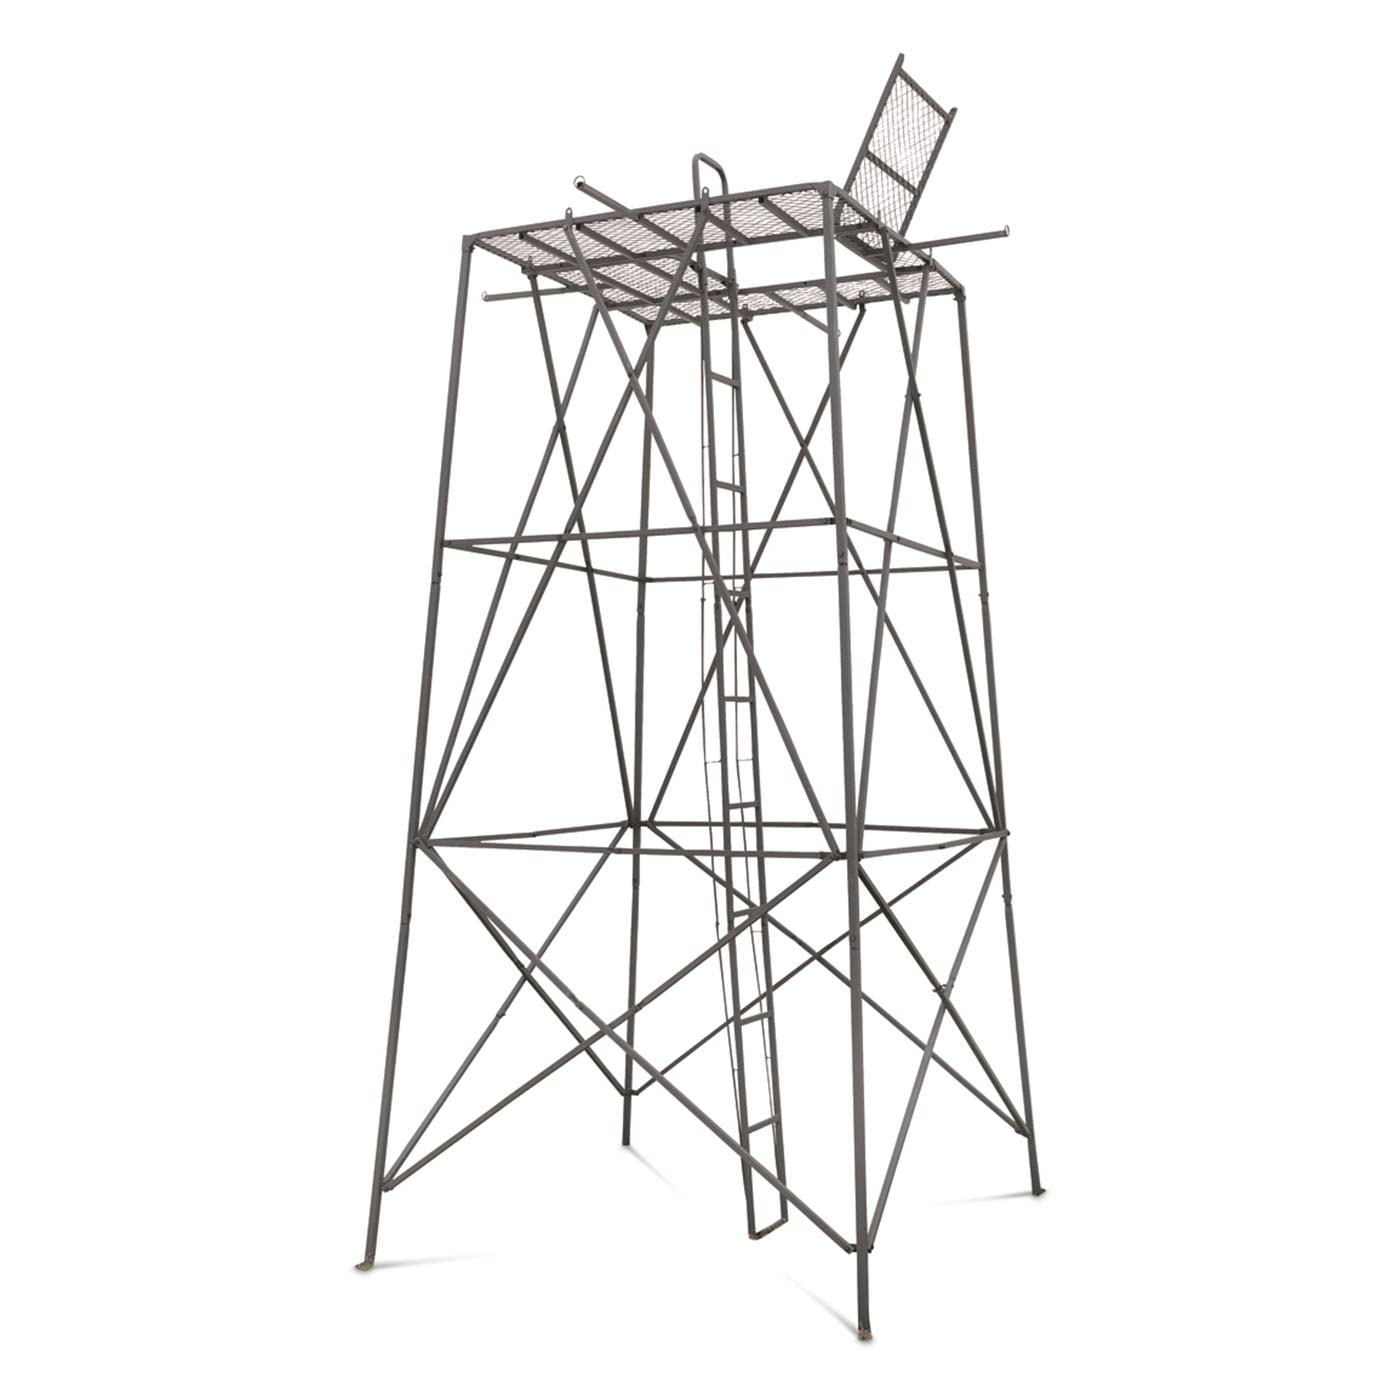 Guide Gear 10' Elevated Hunting Tower Platform Climbing Ladder Stand